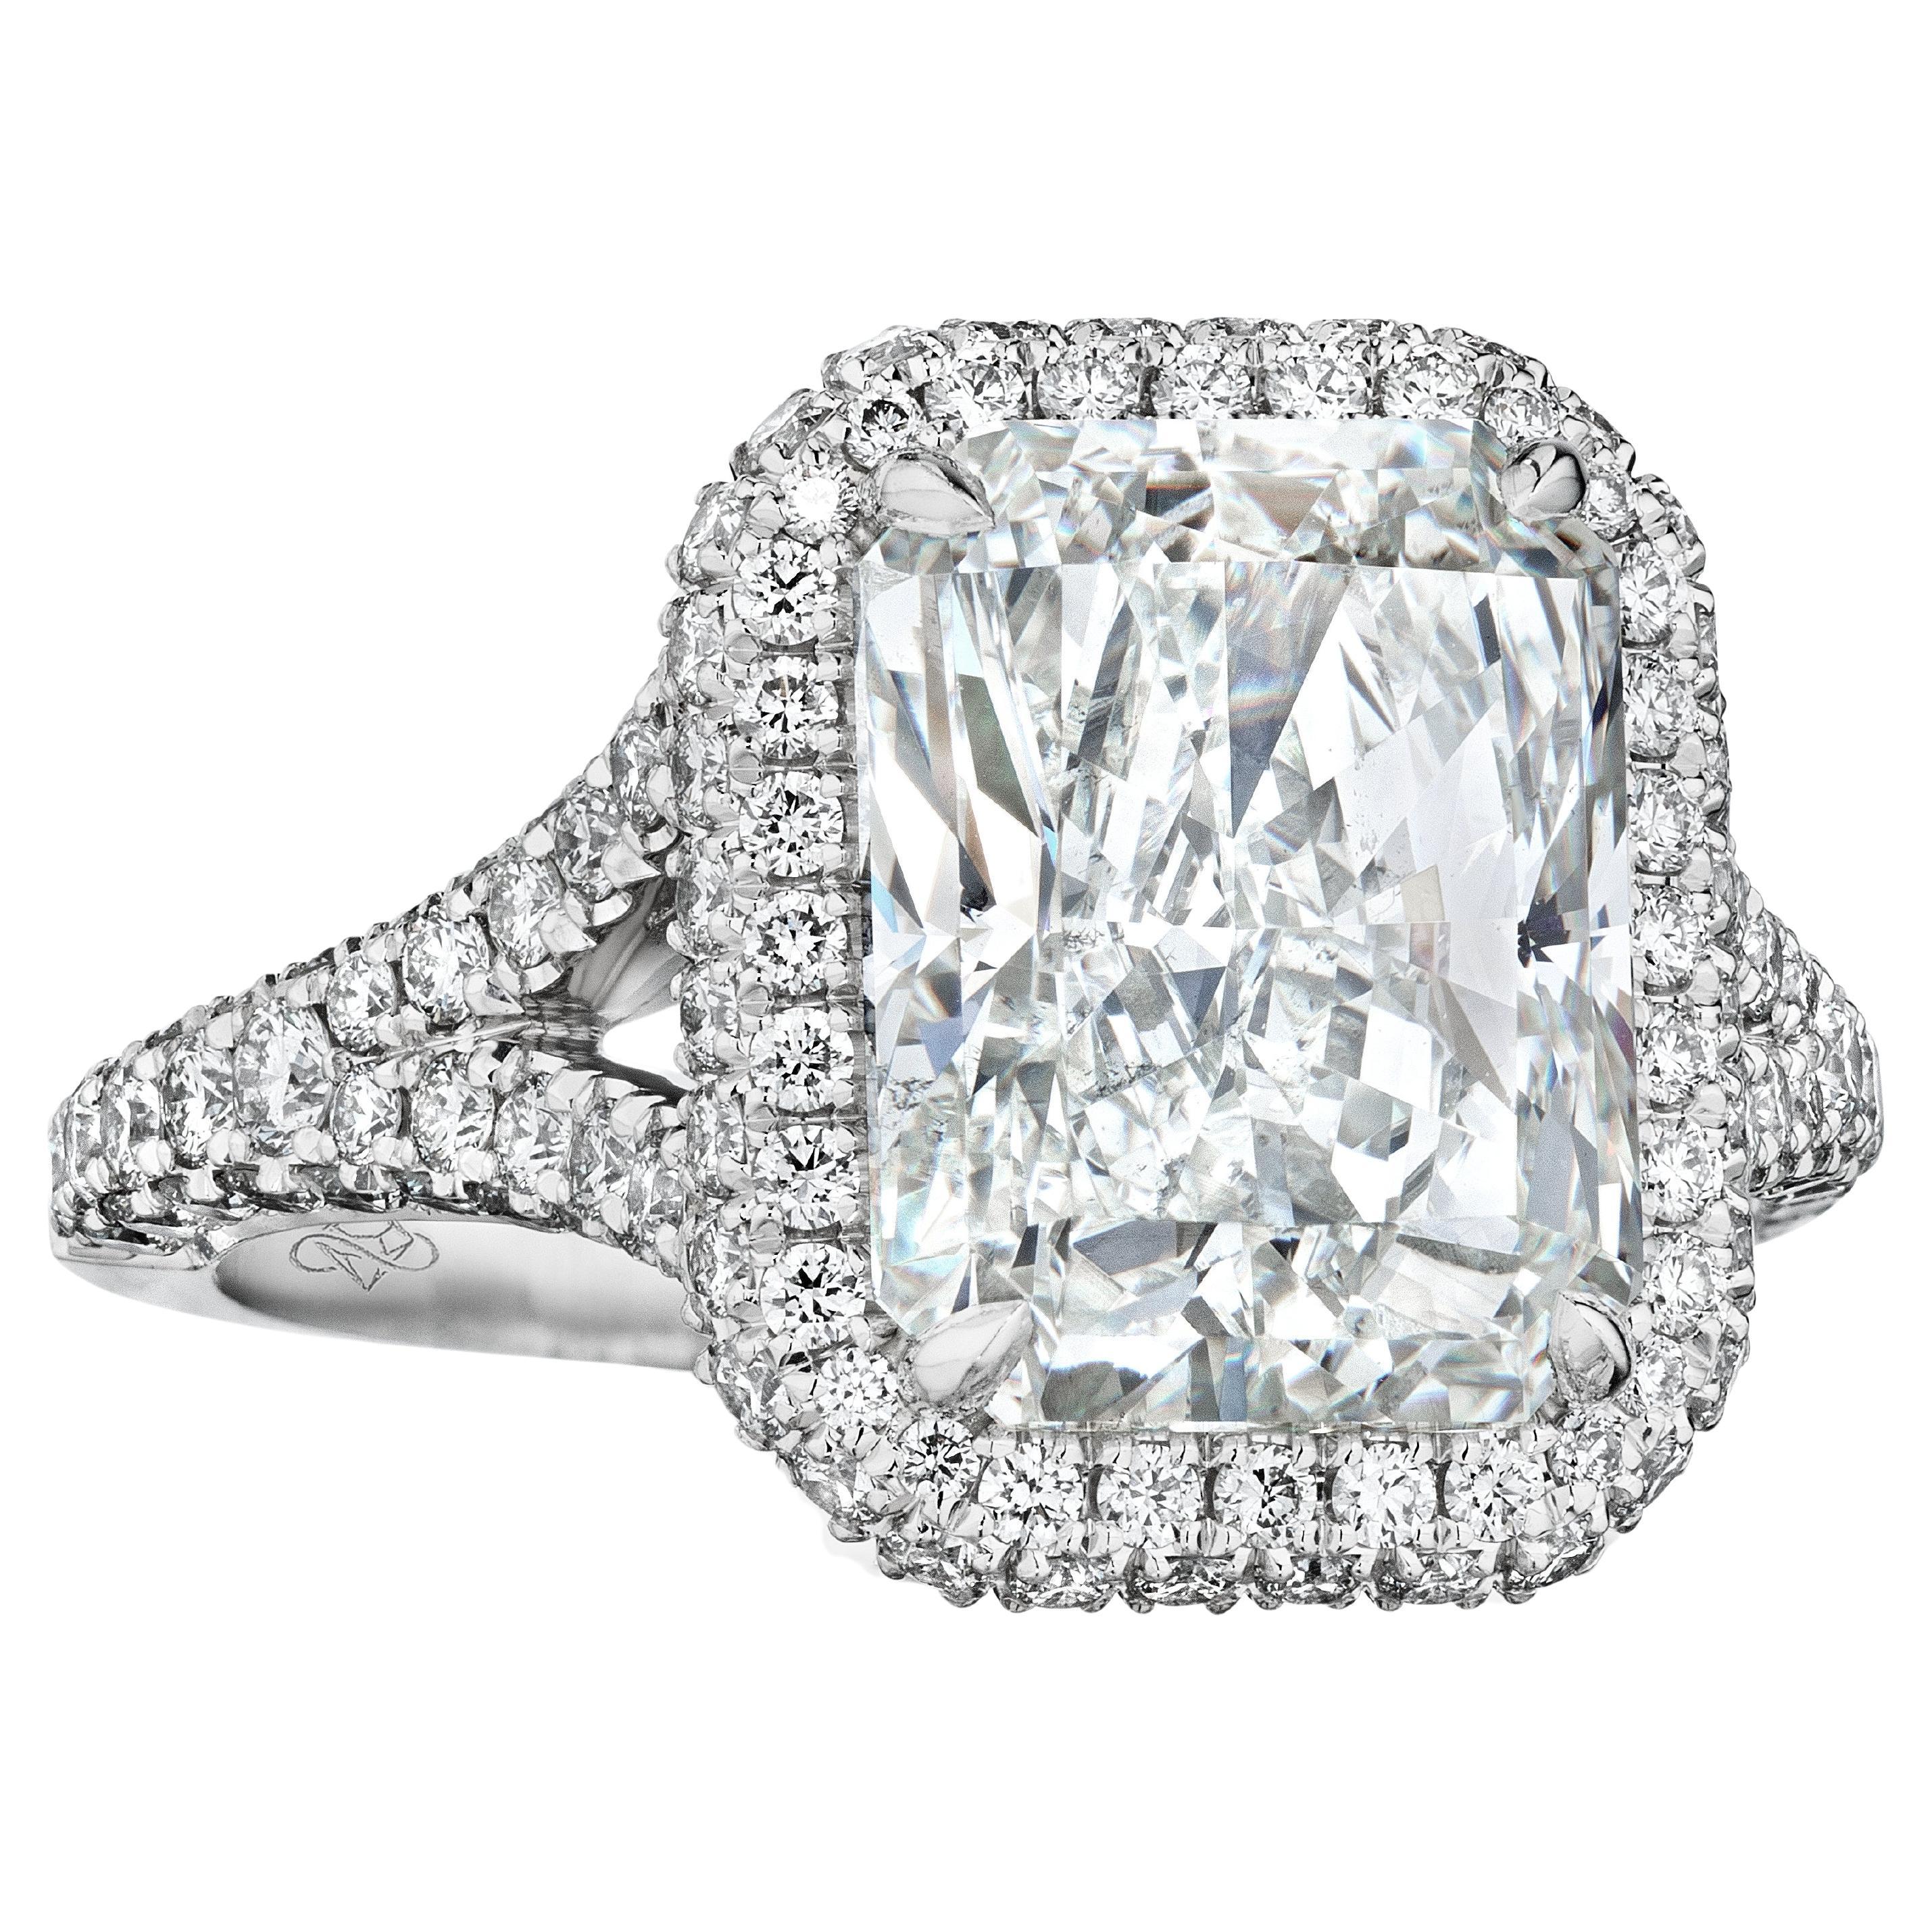 GIA Certified 4.14 Carat F VS2 Radiant Diamond Engagement Ring "Patricia"